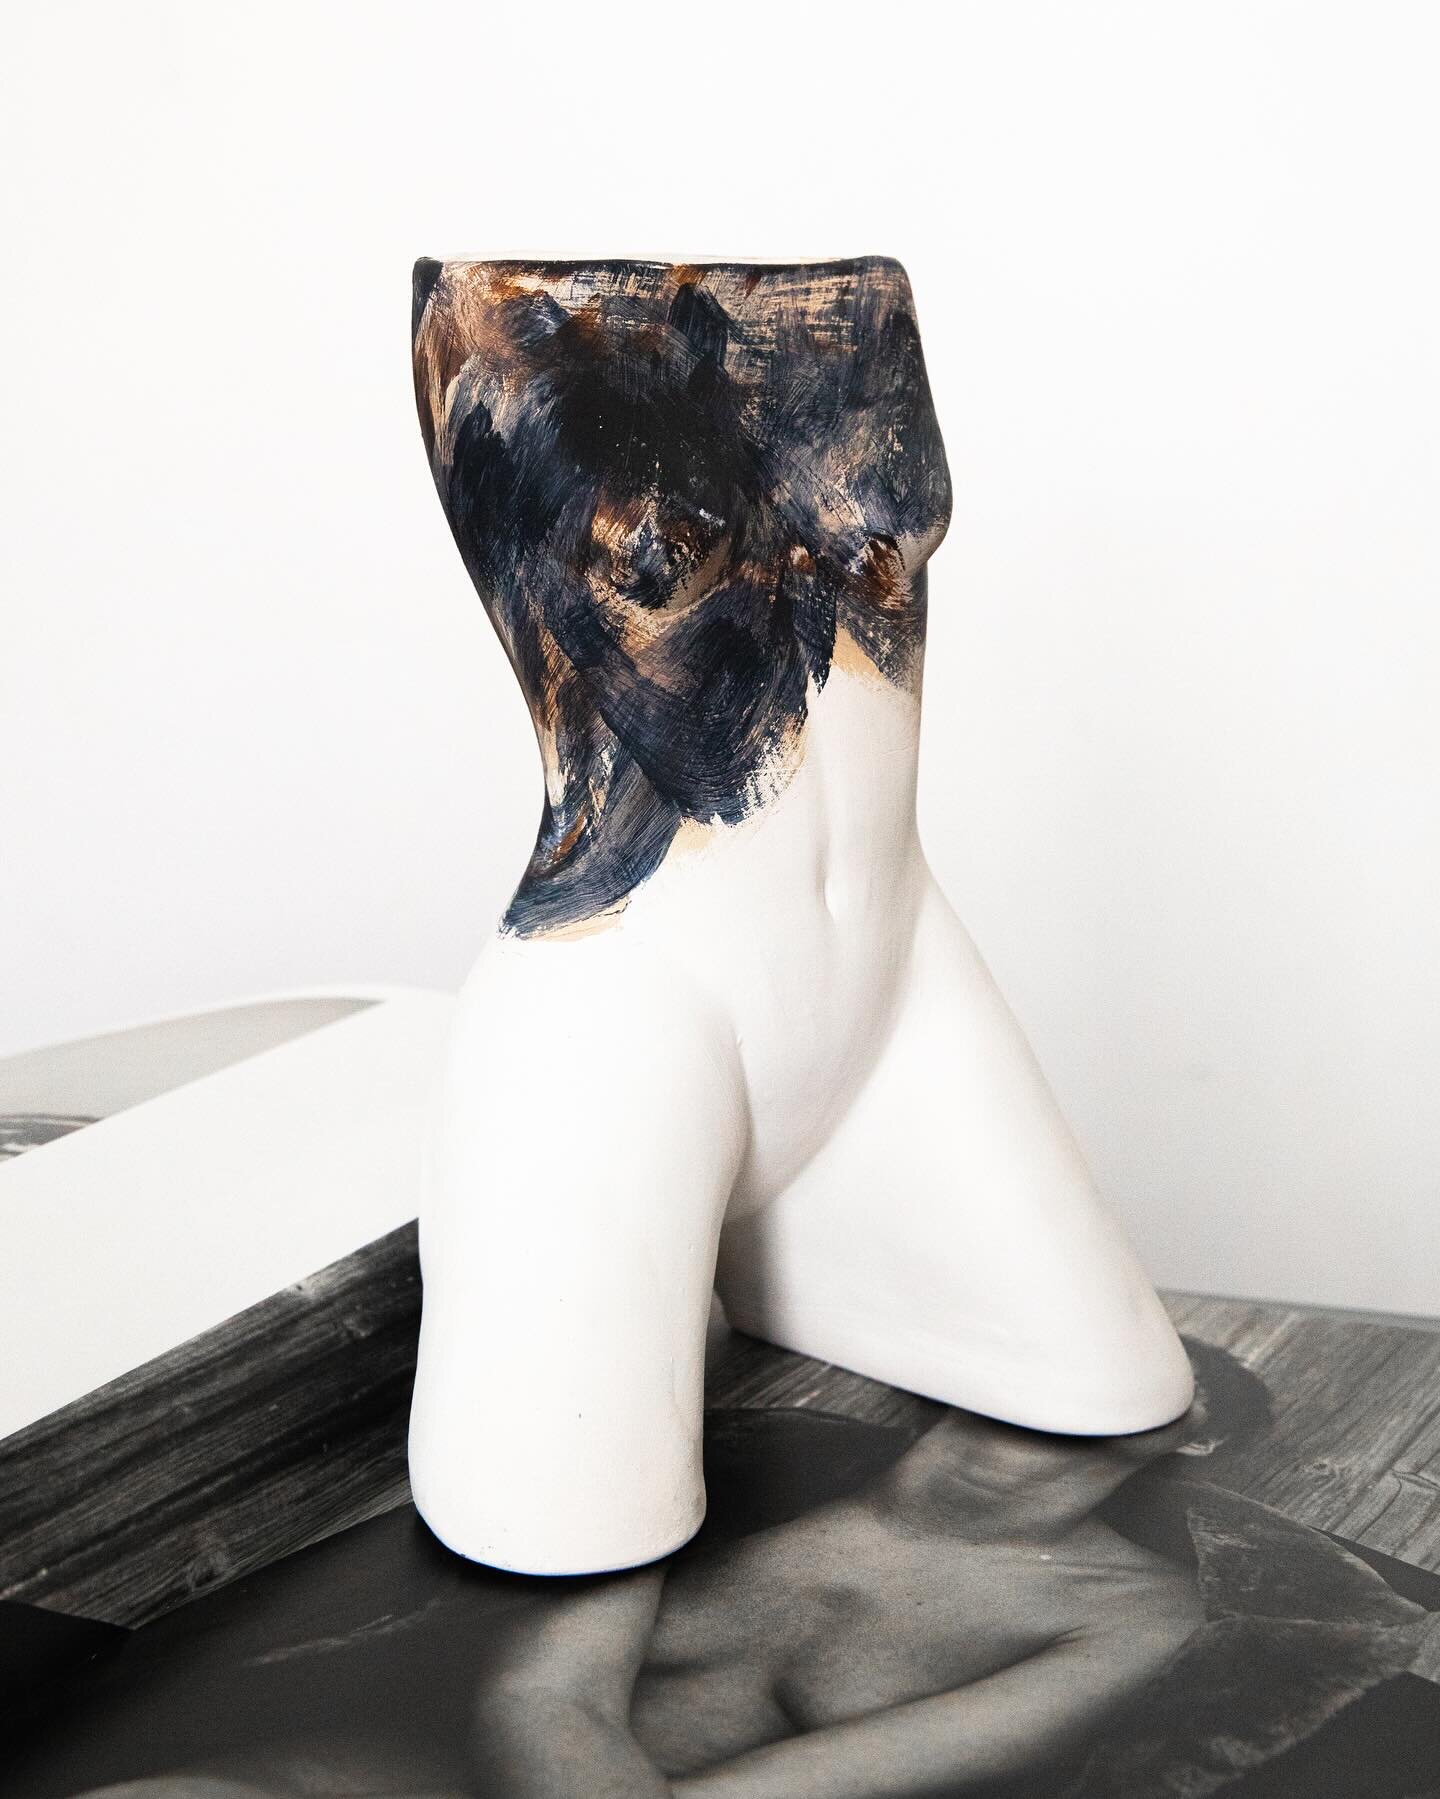 My PODEROSA One of a kind hand-painted ceramic sculpture vase ✨

Height: approximately 22 cm | 8.7 inches

Each sculpture is a limited edition of 85 and is signed and numbered.

&ldquo;As I was painting the series, Disentangling, I felt the need to g